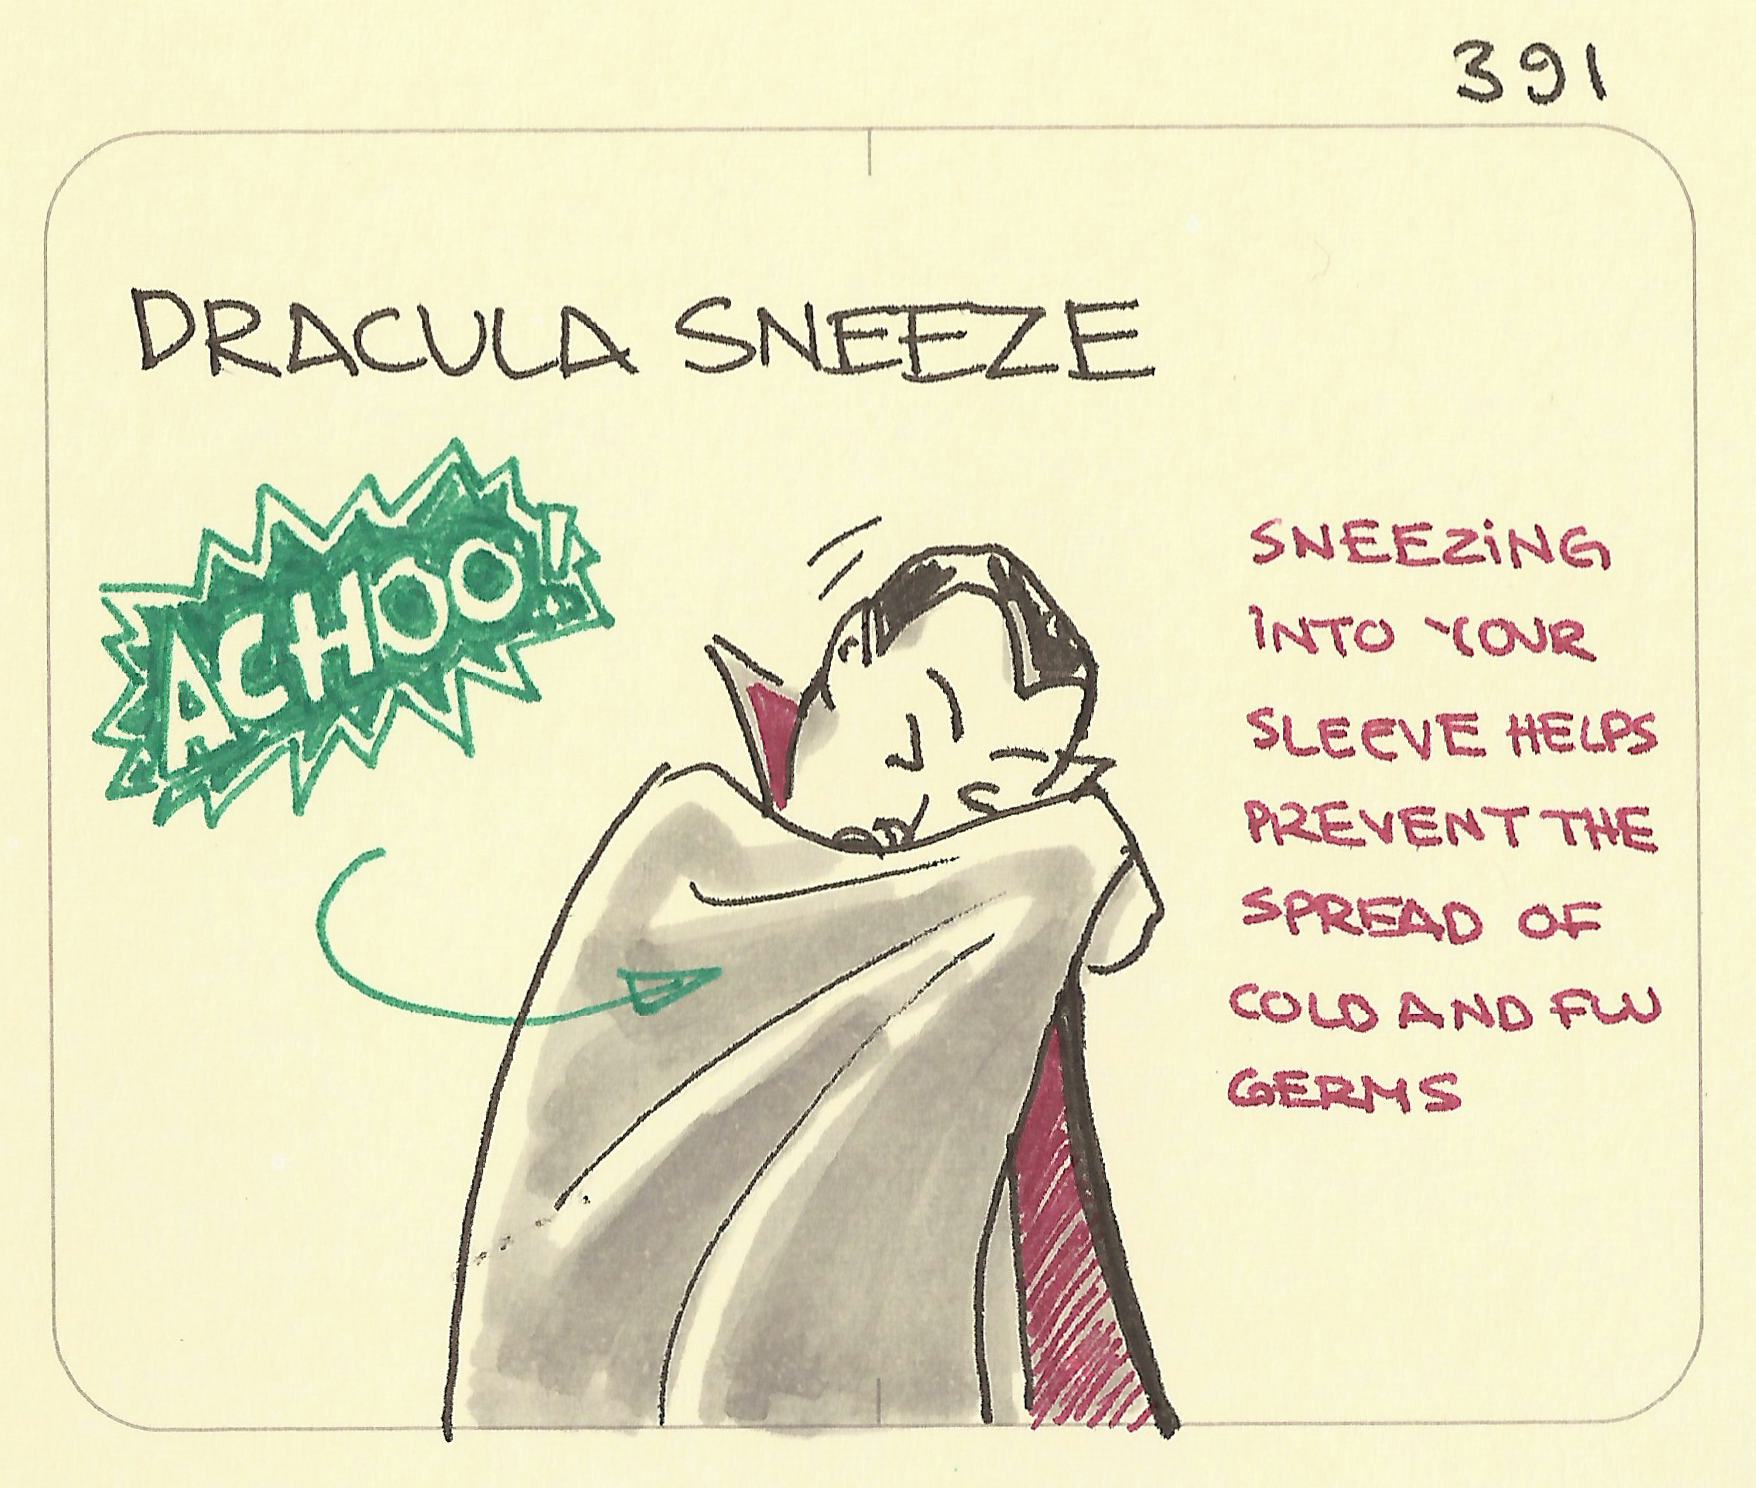 Dracula sneeze image: Dracula hooks round his cape to sneeze into his elbow and protect others from the germs of his sneeze